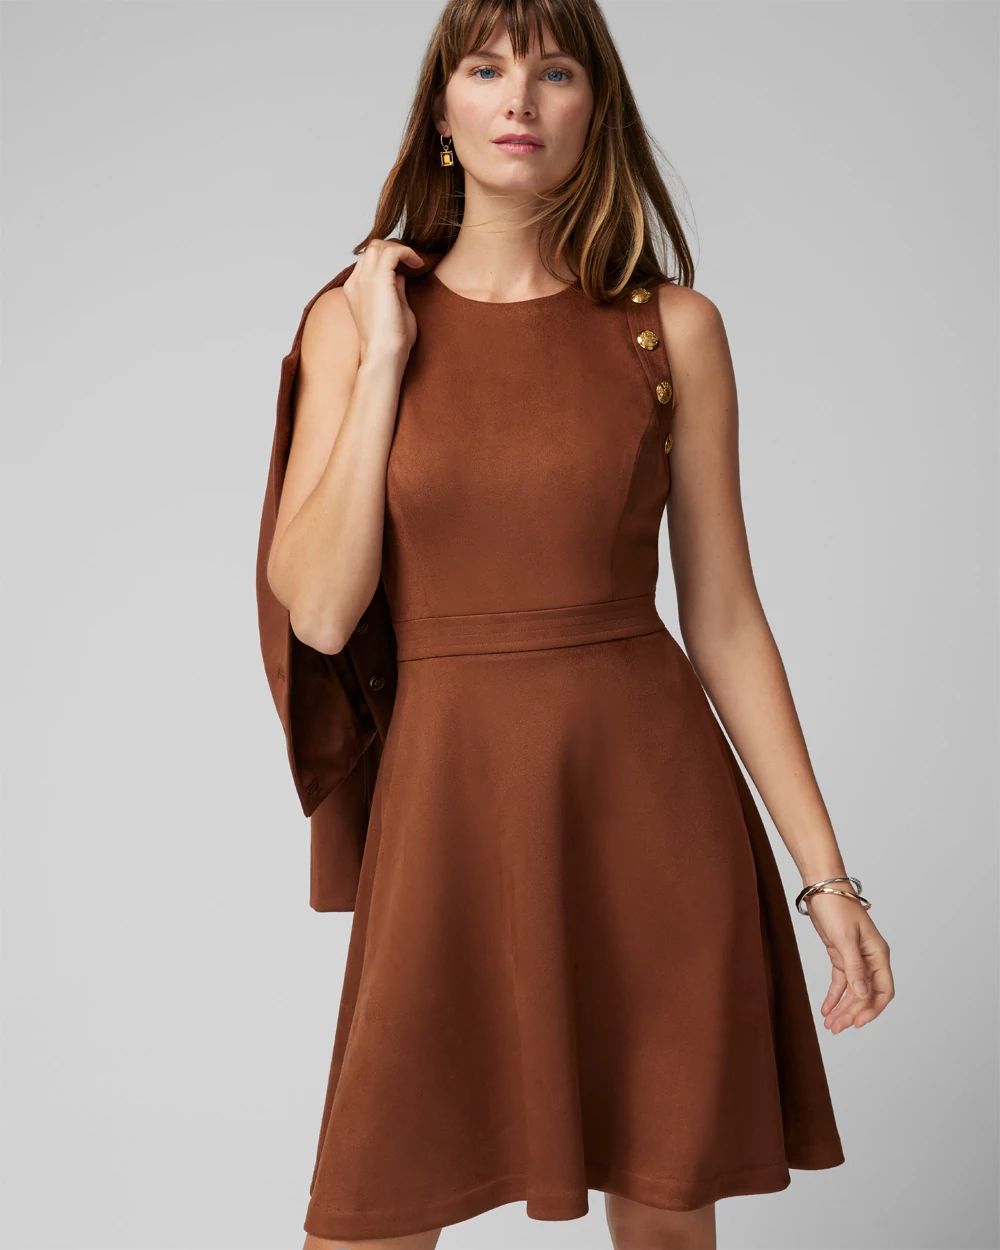 Petite Sleeveless Crest Detail Suede Fit-N-Flare Dress click to view larger image.